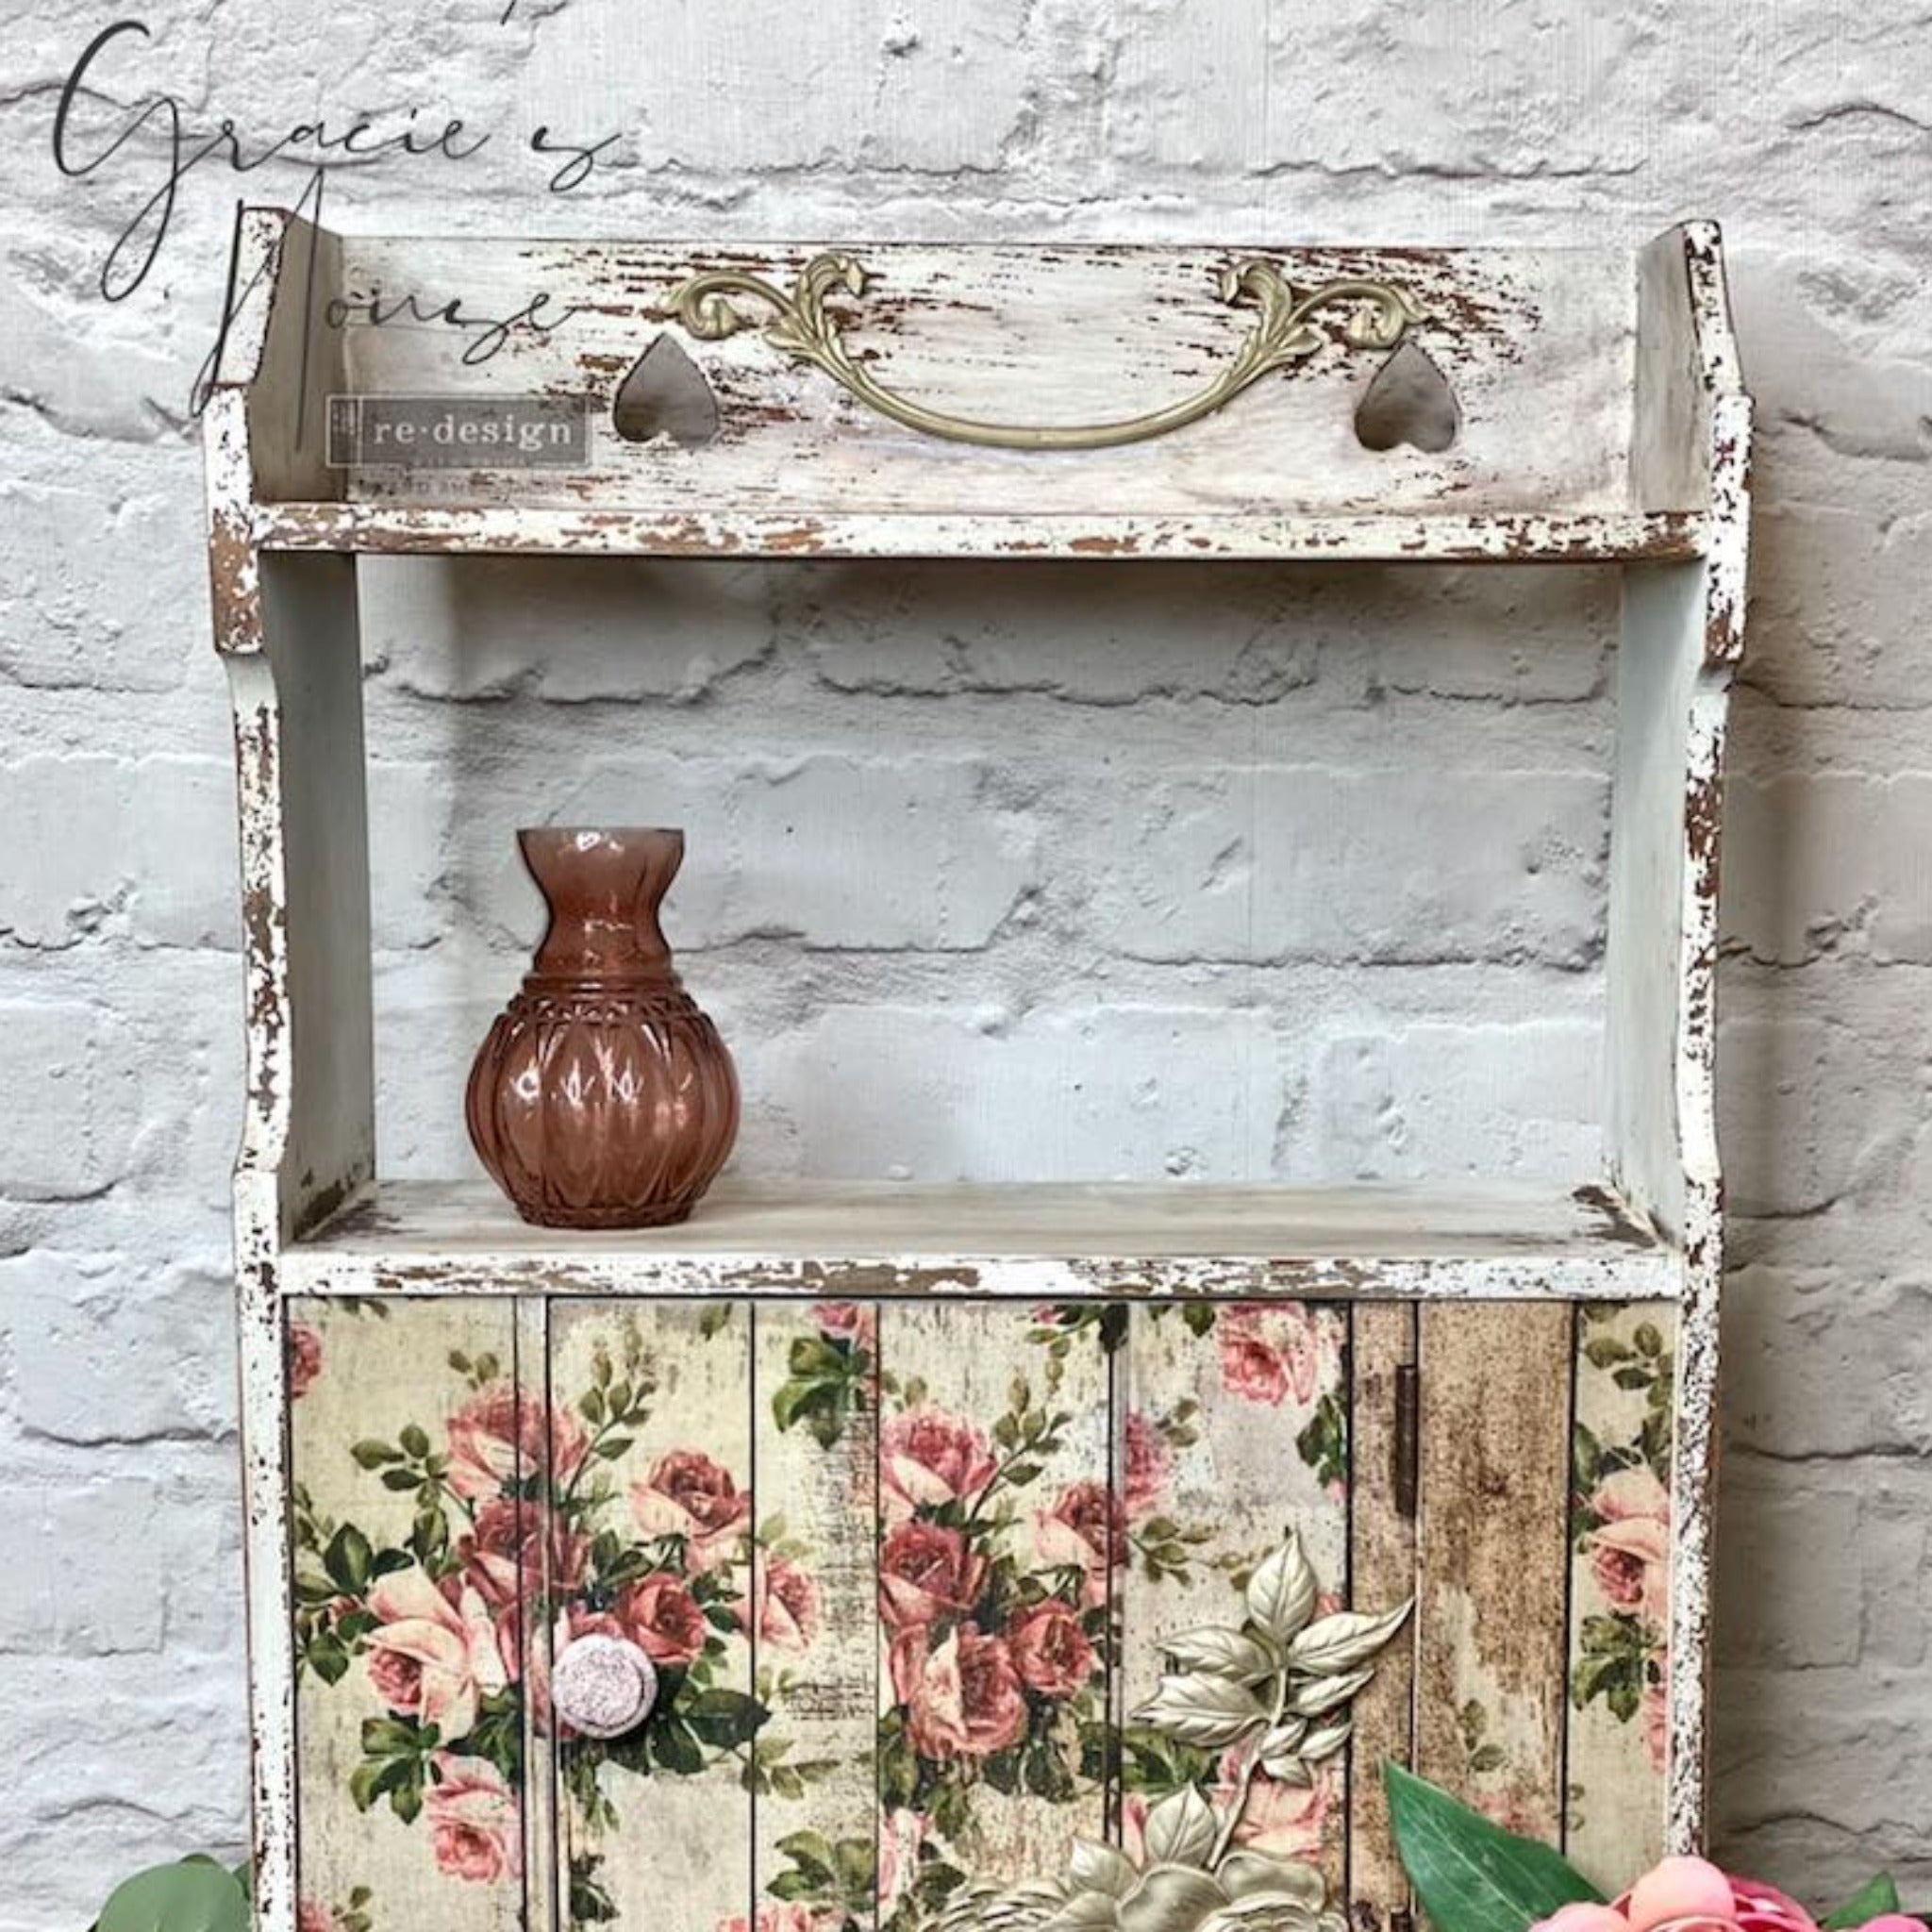 A vintage small bathroom cabinet with a hutch style shelf refurbished by Gracie's House is painted a very distressed white and features ReDesign with Prima's Shabby Floral tissue paper on its door.